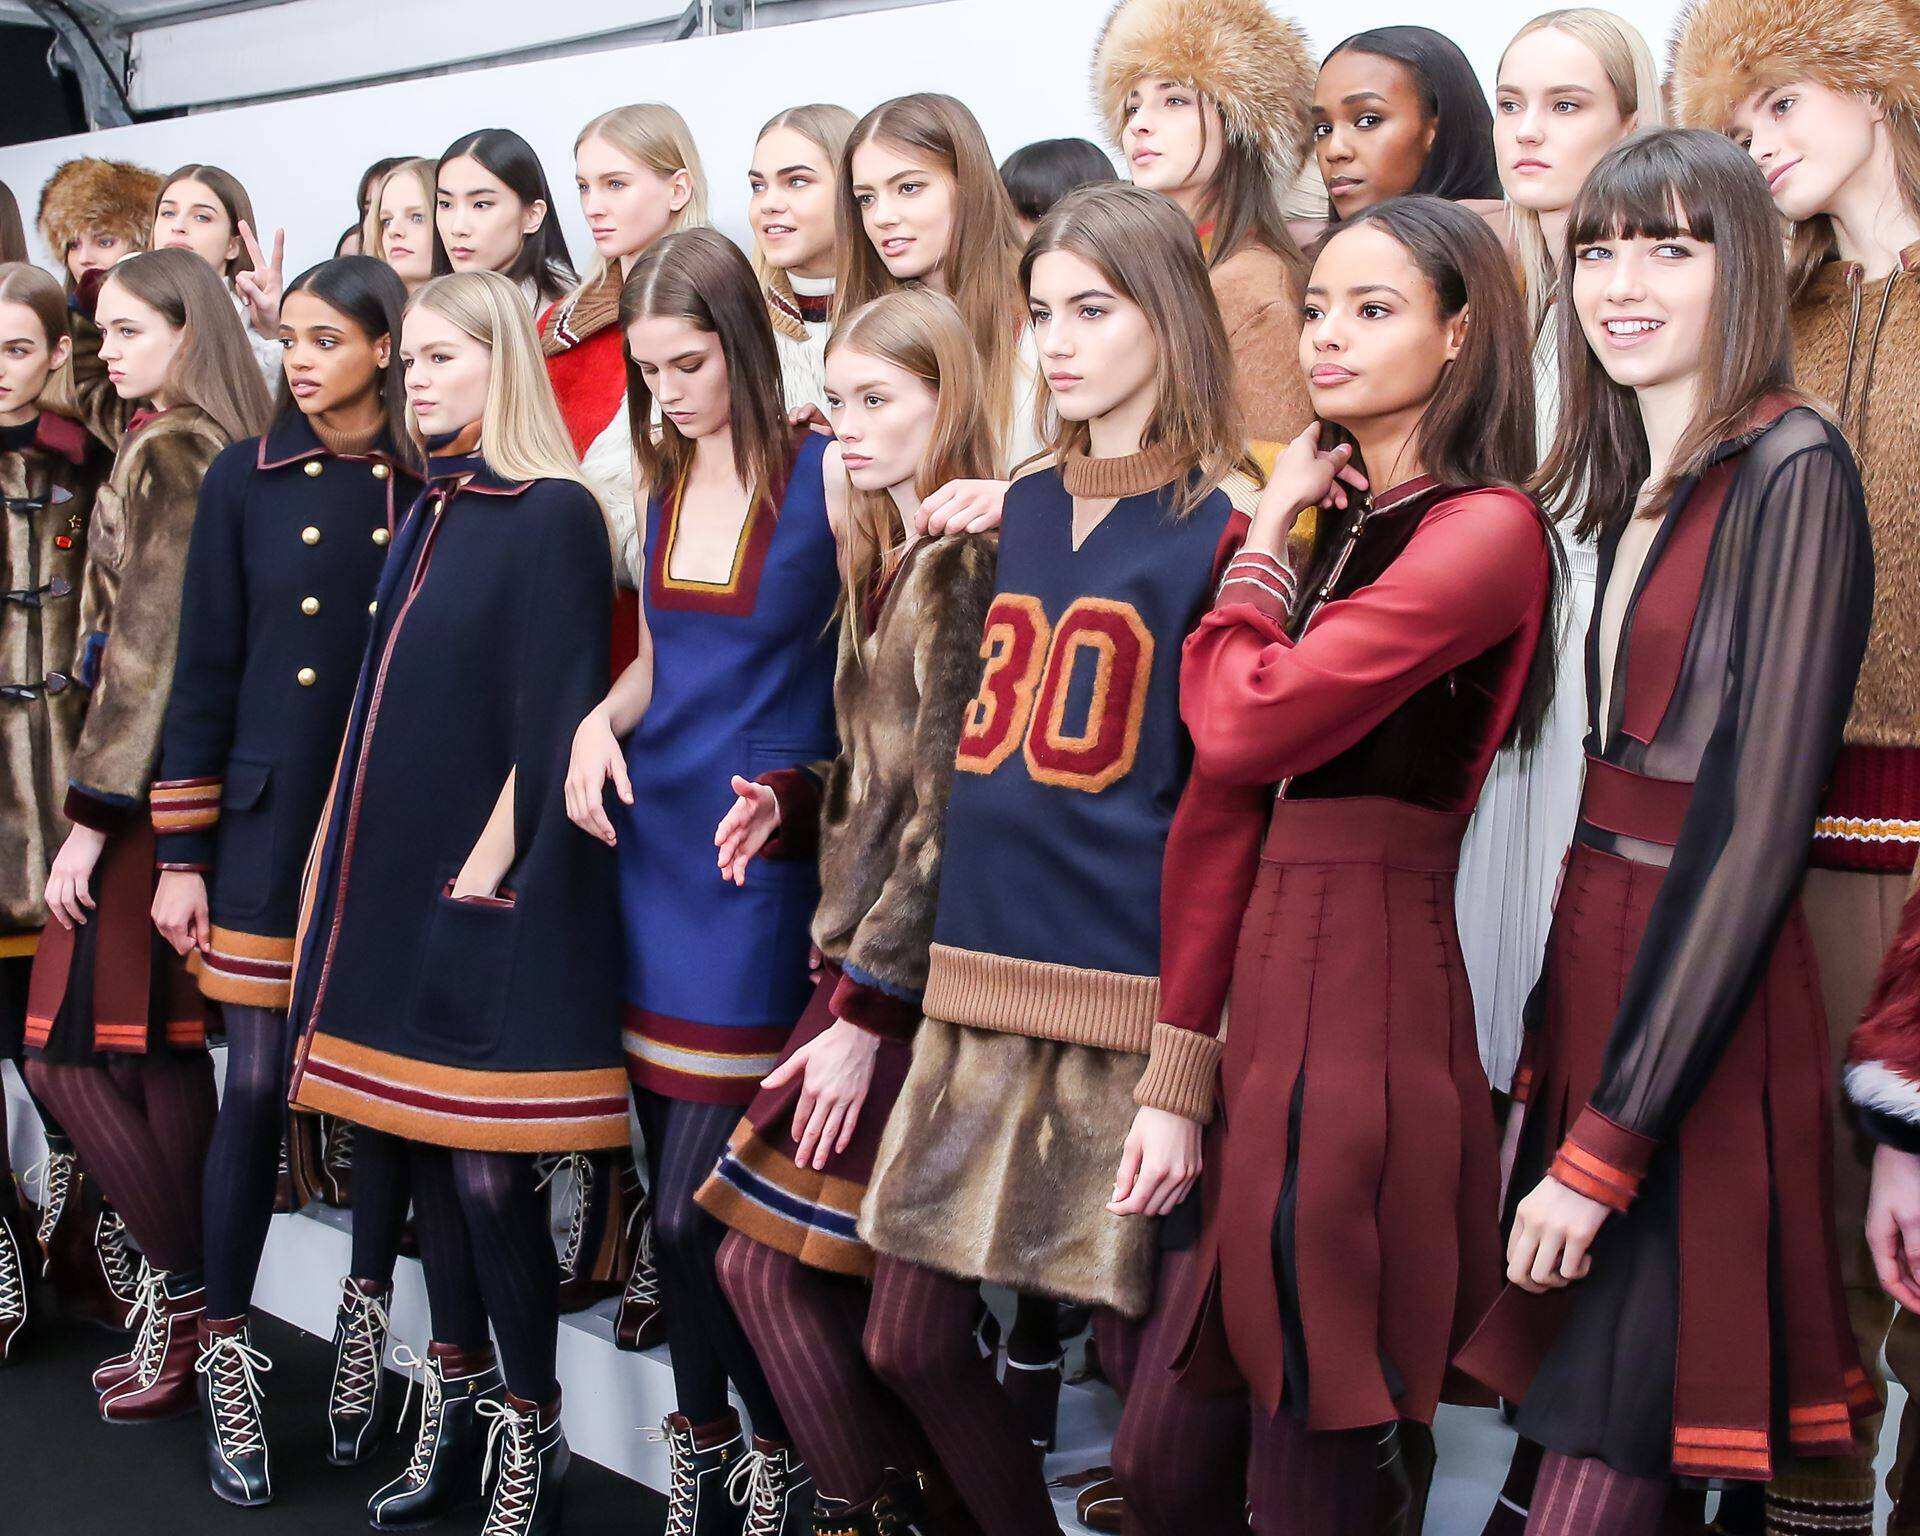 BACKSTAGE TOMMY HILFIGER FW 2015-16 WOMEN’S COLLECTION | The Skinny Beep1920 x 1536